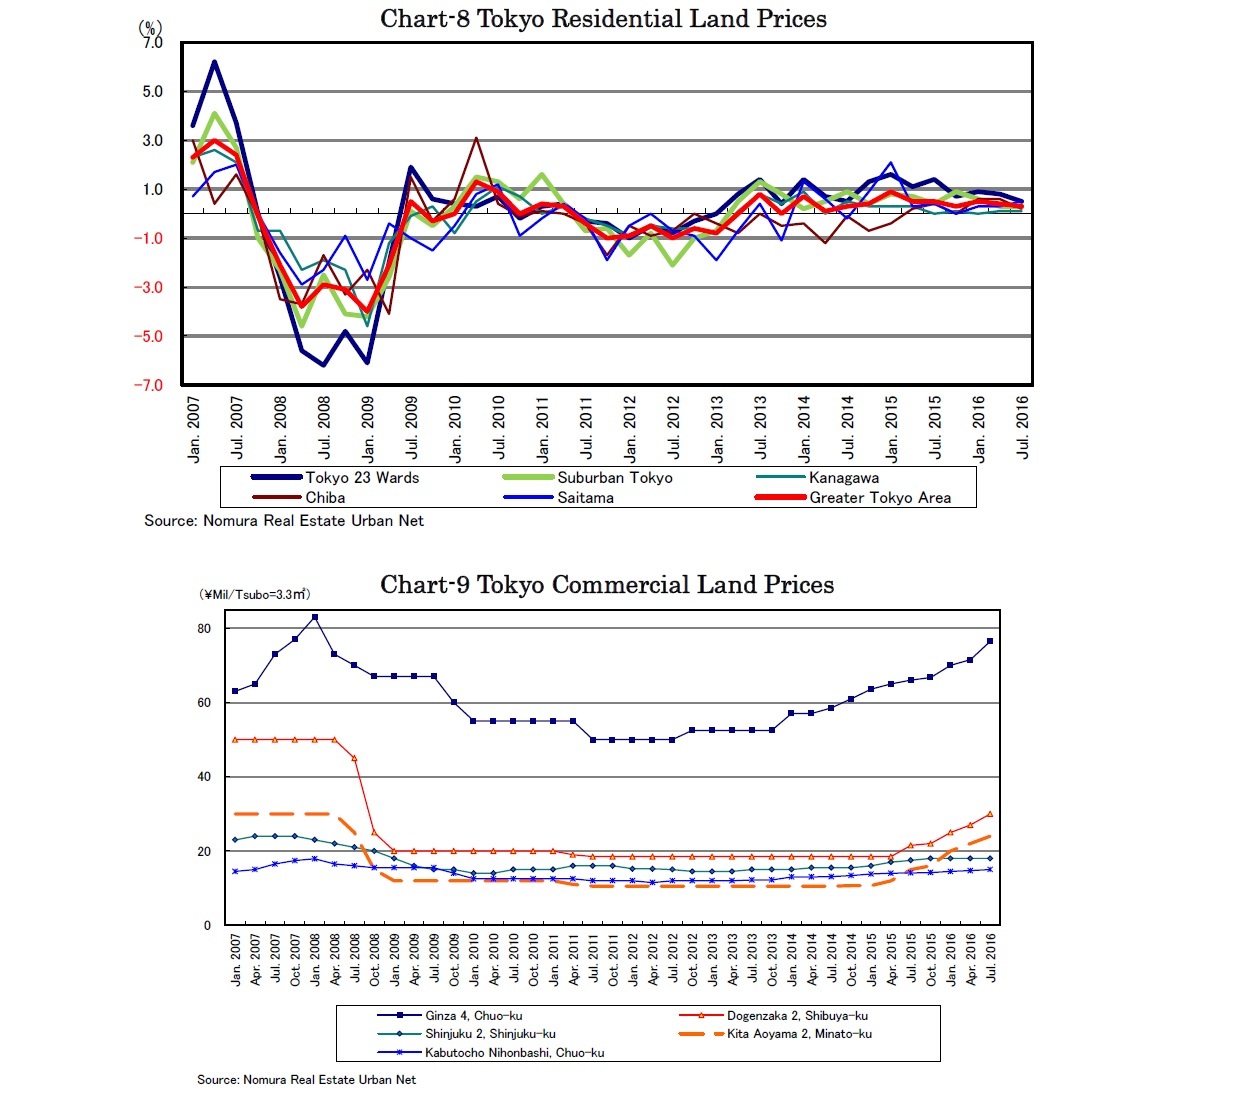 Chart-8 Tokyo Residential Land Prices/Chart-9 Tokyo Commercial Land Prices